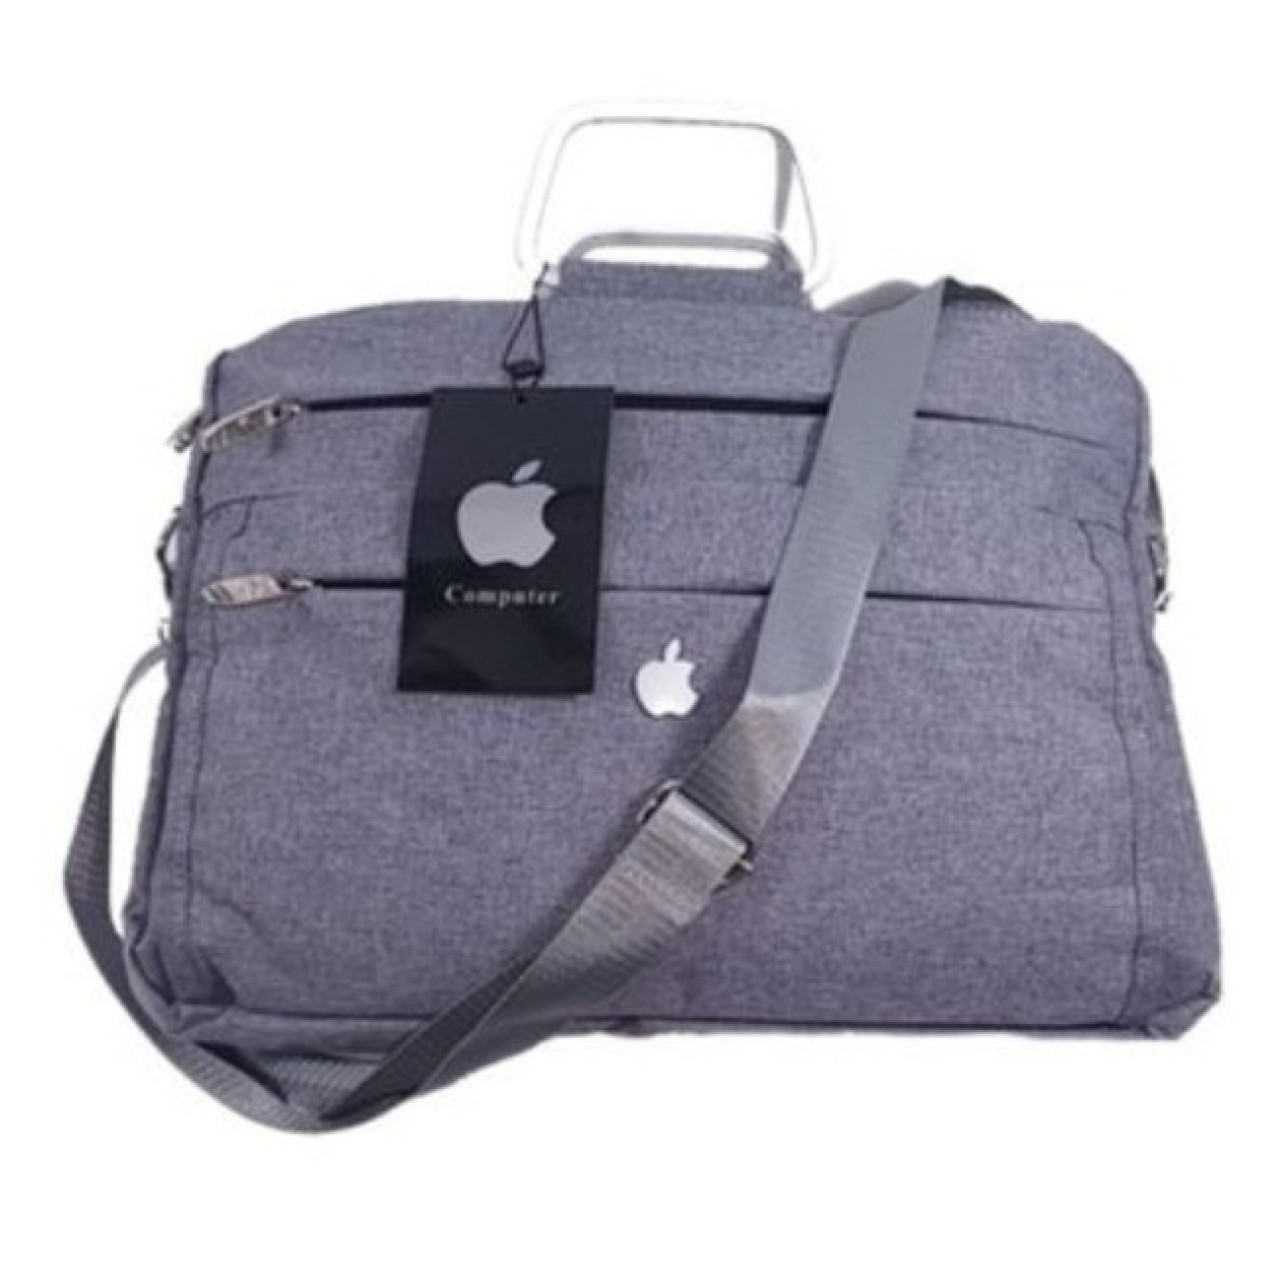 Frosted Fabric Macbook Bag 15.4 Air/Pro/Retina/Touch Bar - Grey